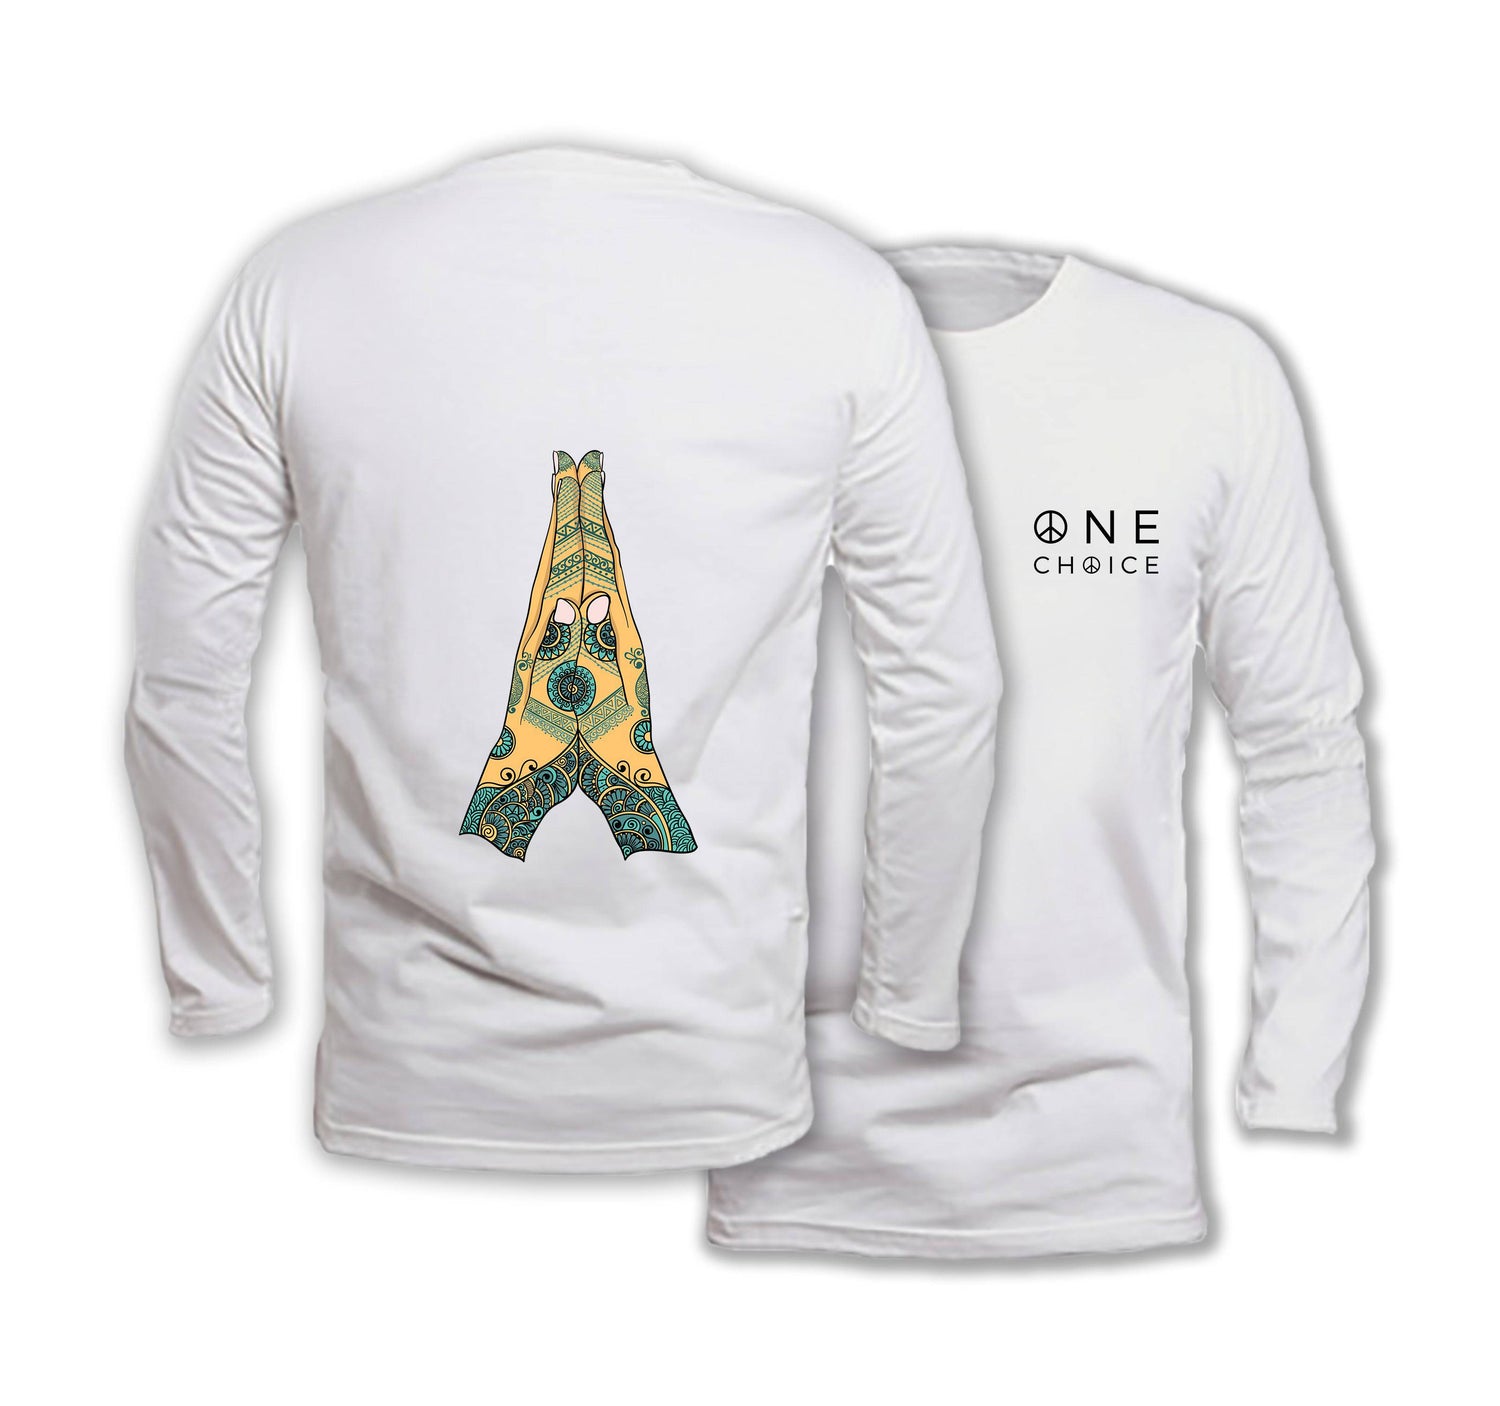 Joined Hands - Long Sleeve Organic Cotton T-Shirt - One Choice Apparel